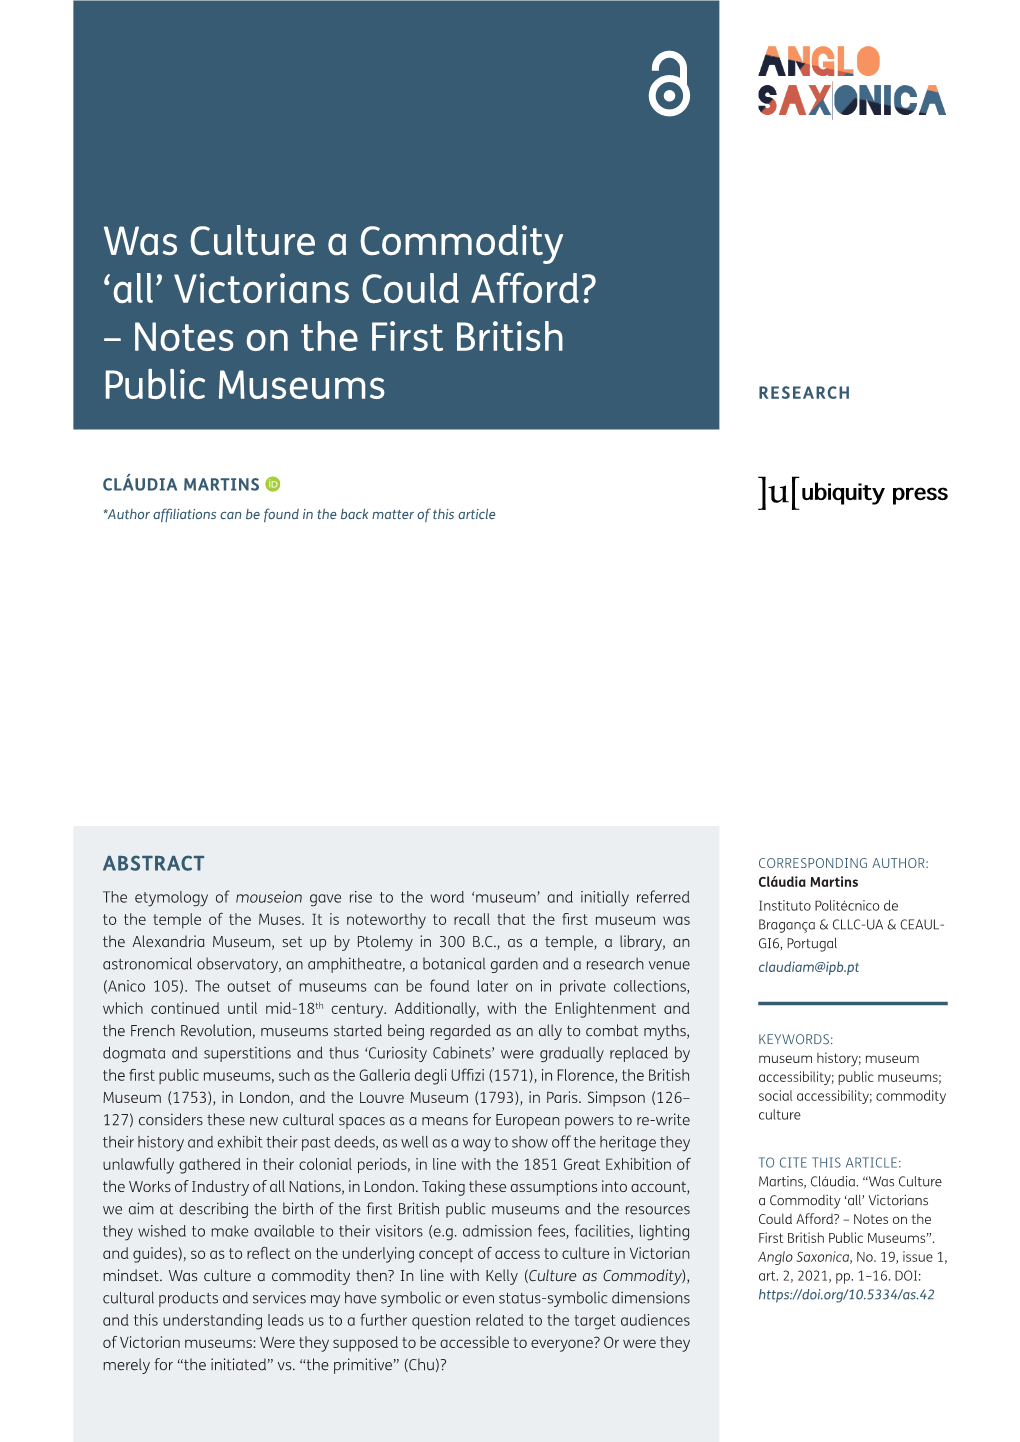 Was Culture a Commodity 'All' Victorians Could Afford? – Notes On